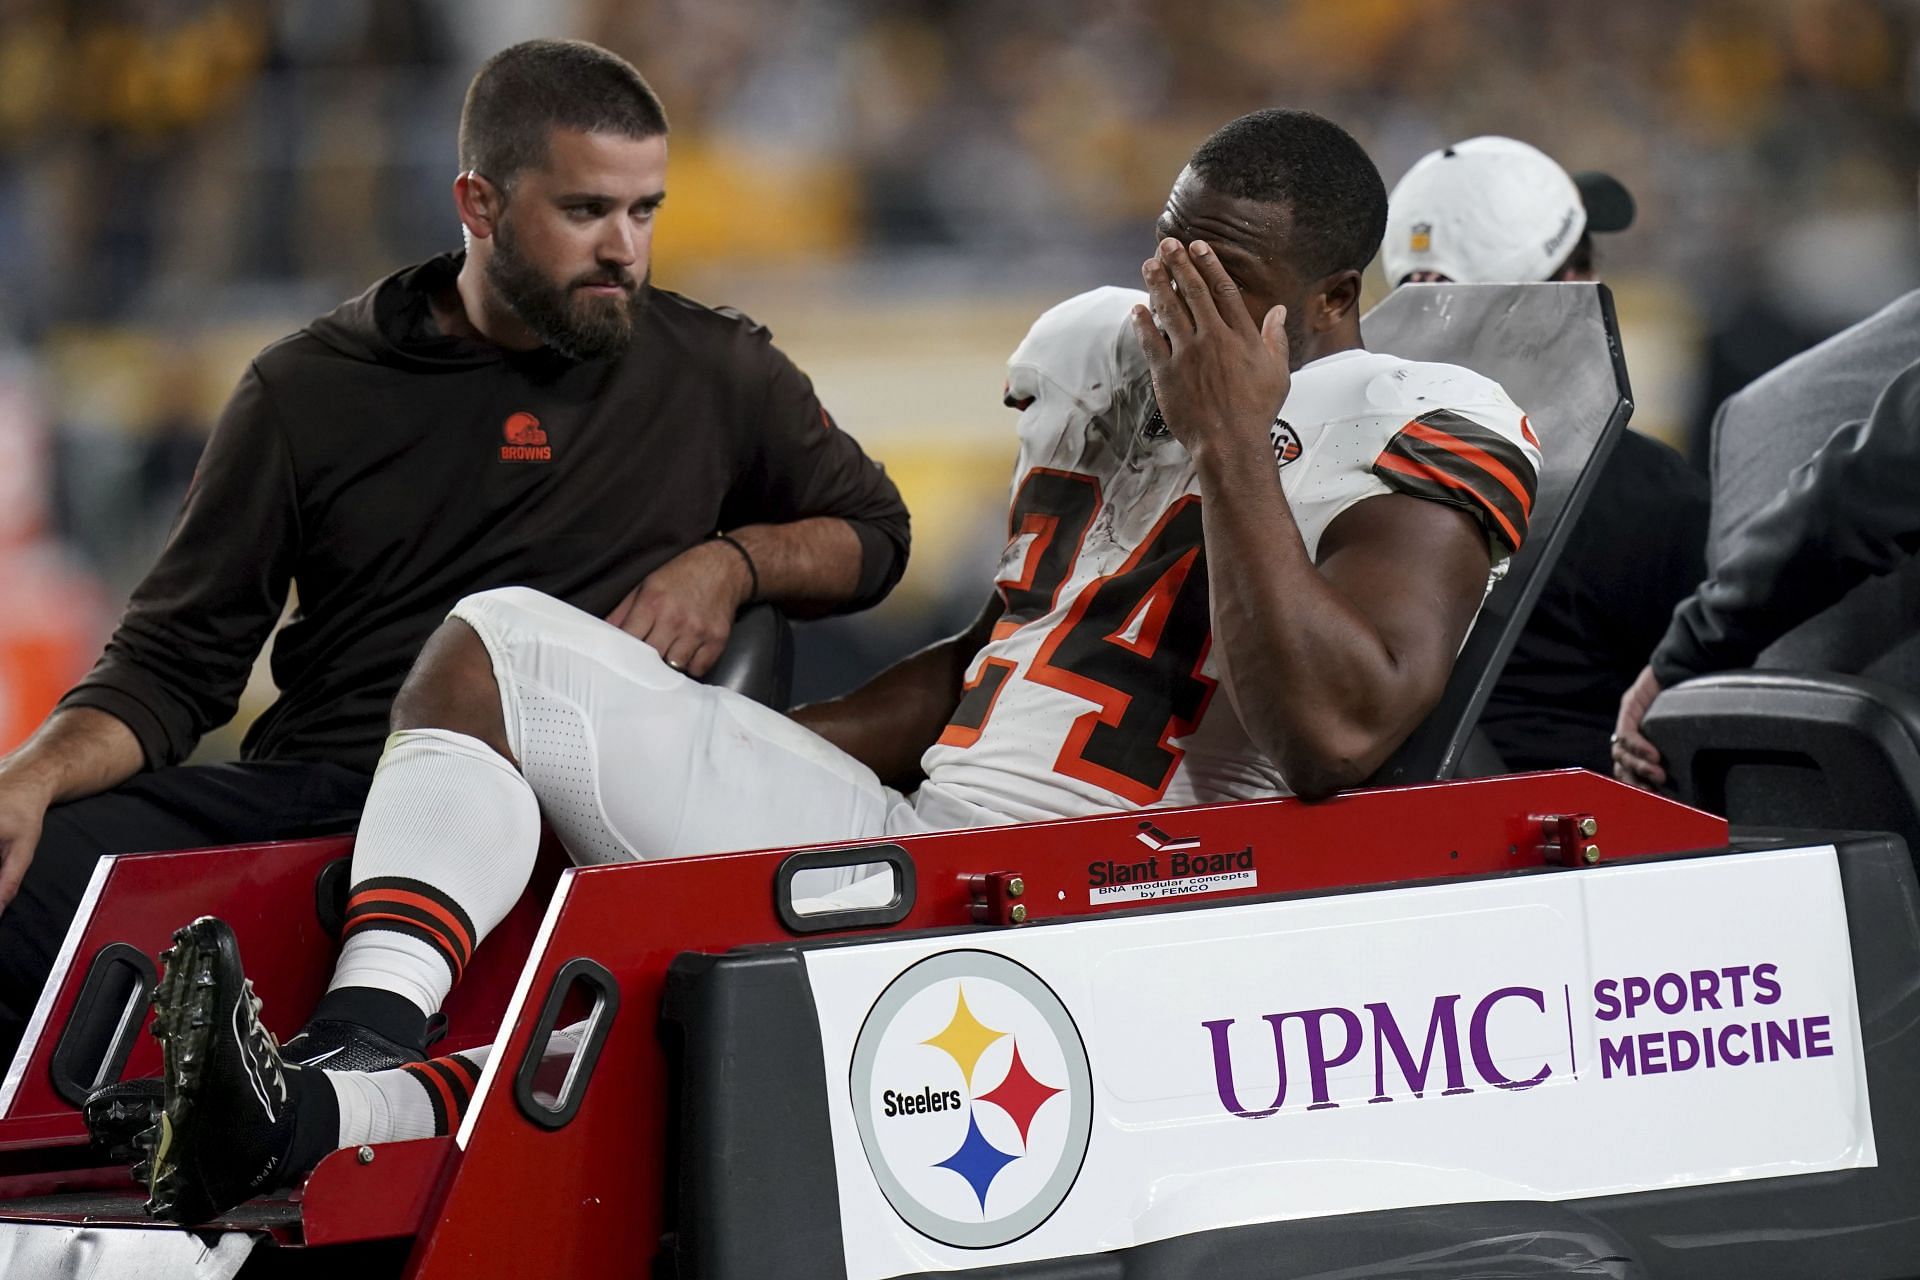 Nick Chubb injury update: When will Browns RB return to Gridiron?